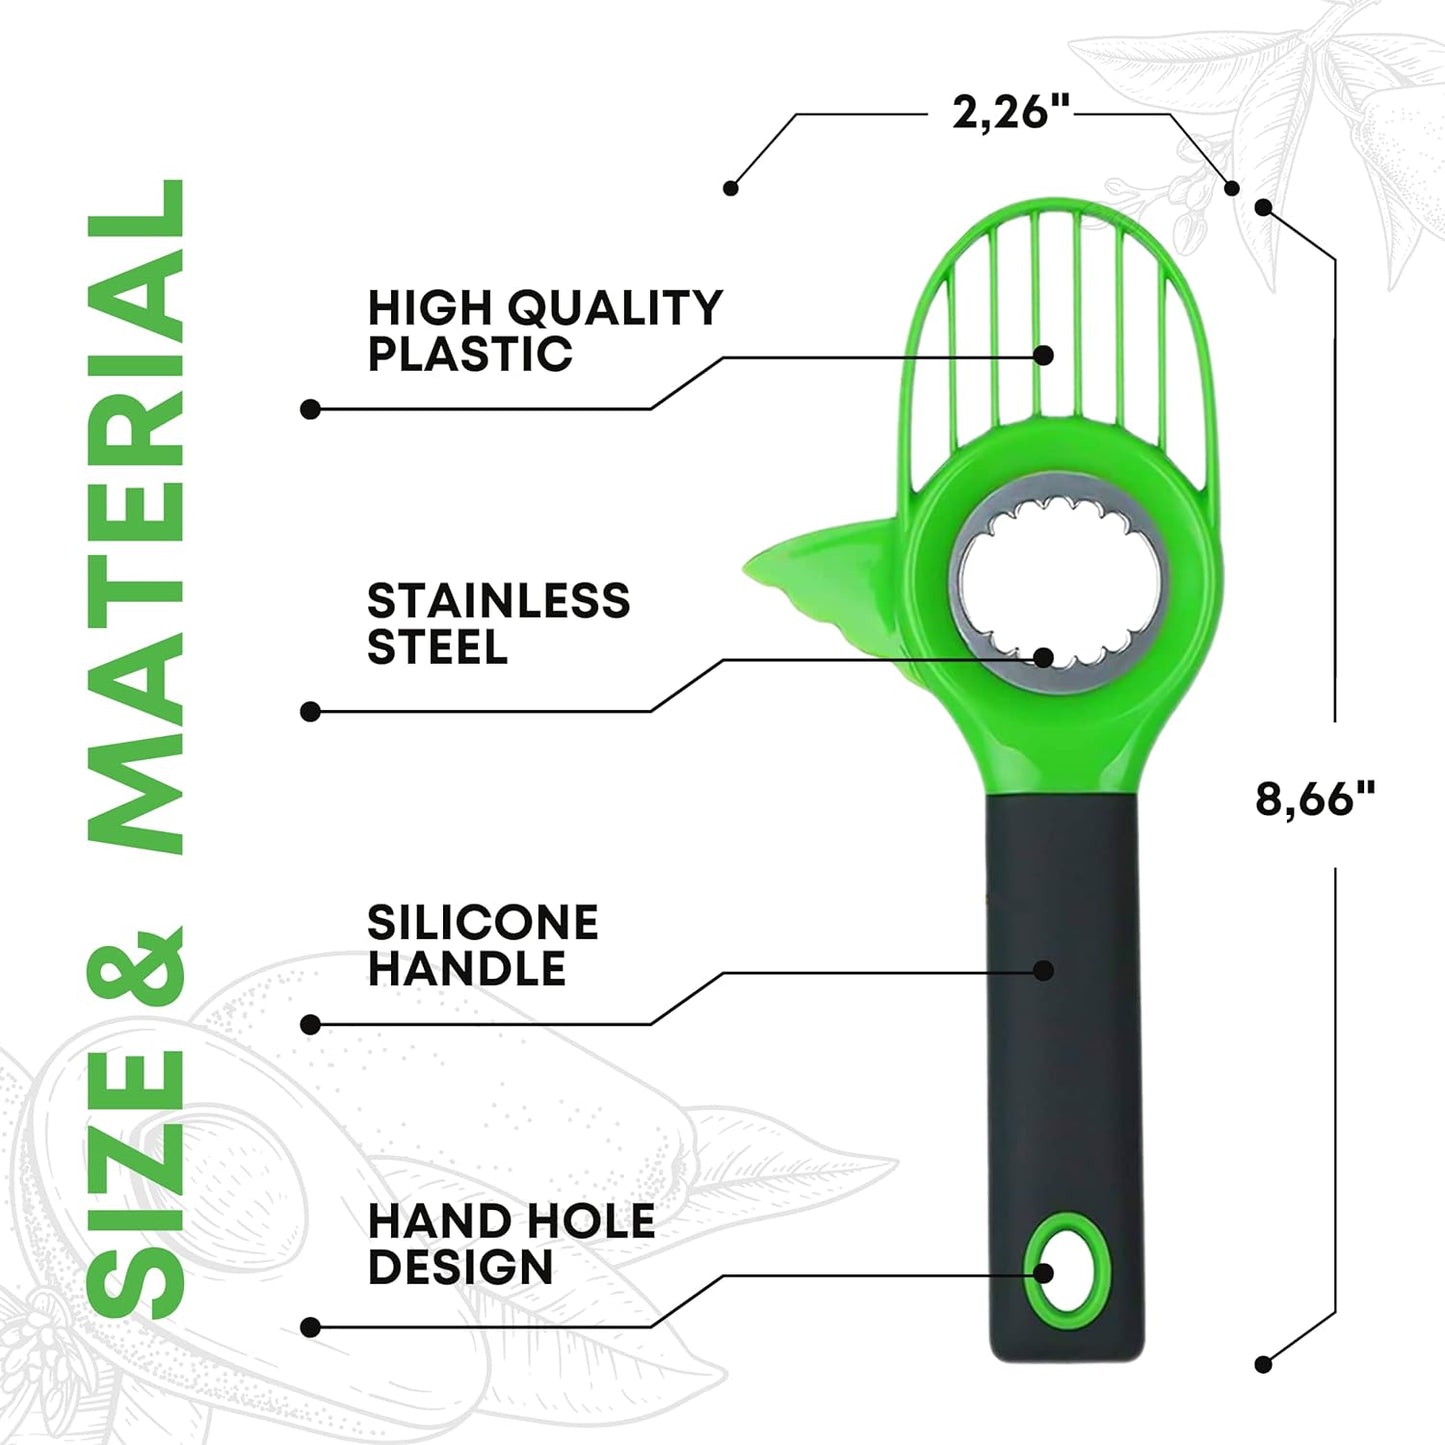 3 in 1 Avocado Slicing Tool – Avocado Cutter with Grip Handle for Fruit and Vegetables Avocado Slicer Splitter Pitter and Cutter with Comfort Handle Avocado Knife Tool for Kitchen Food Vegetable